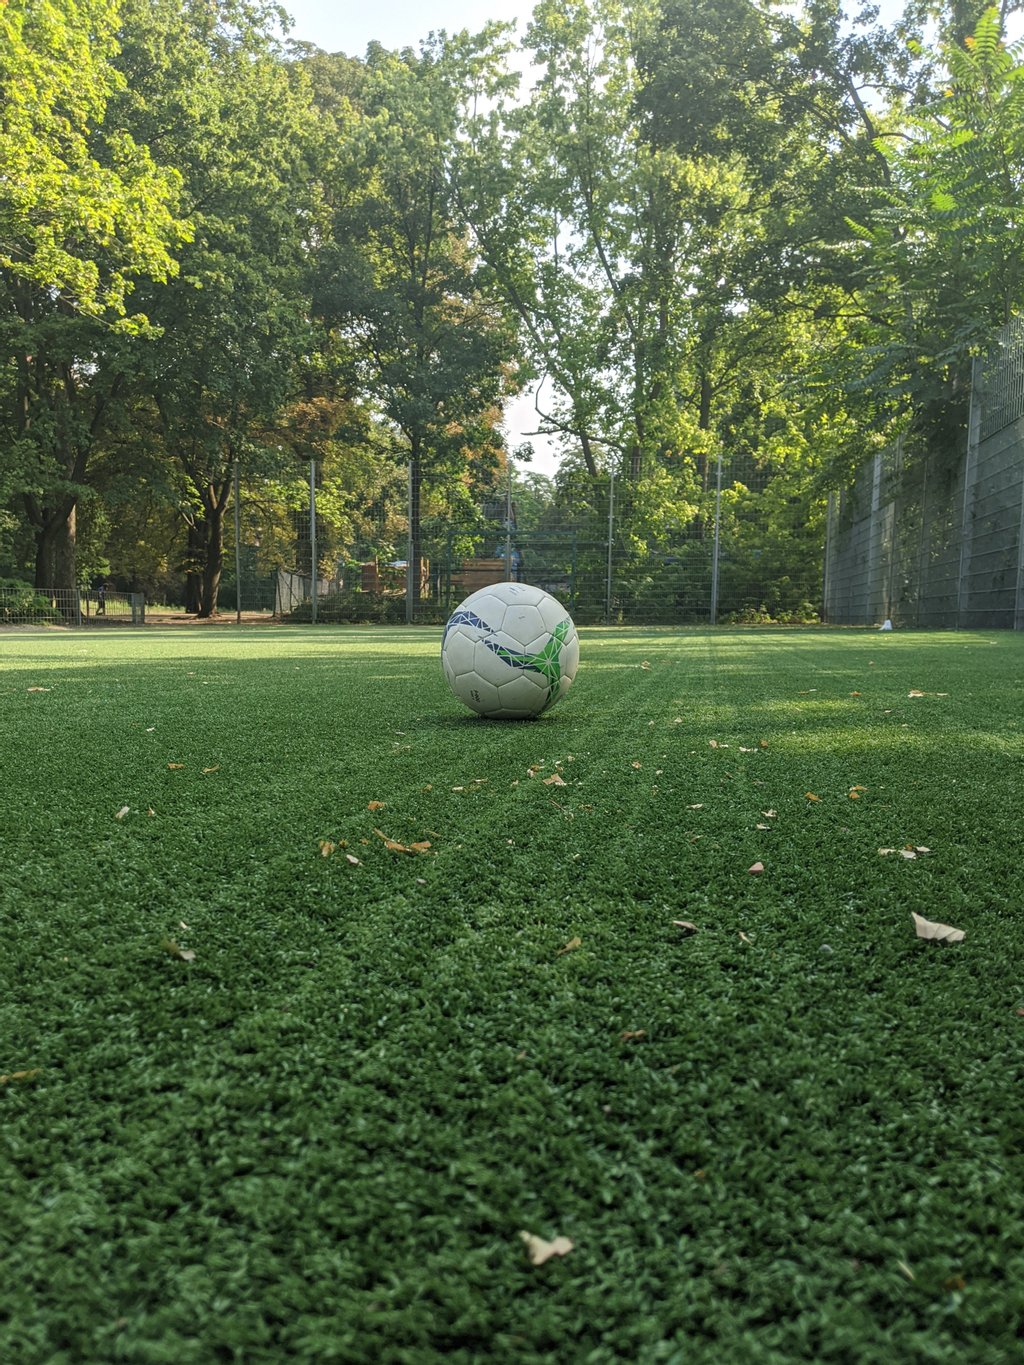 Ball on pitch